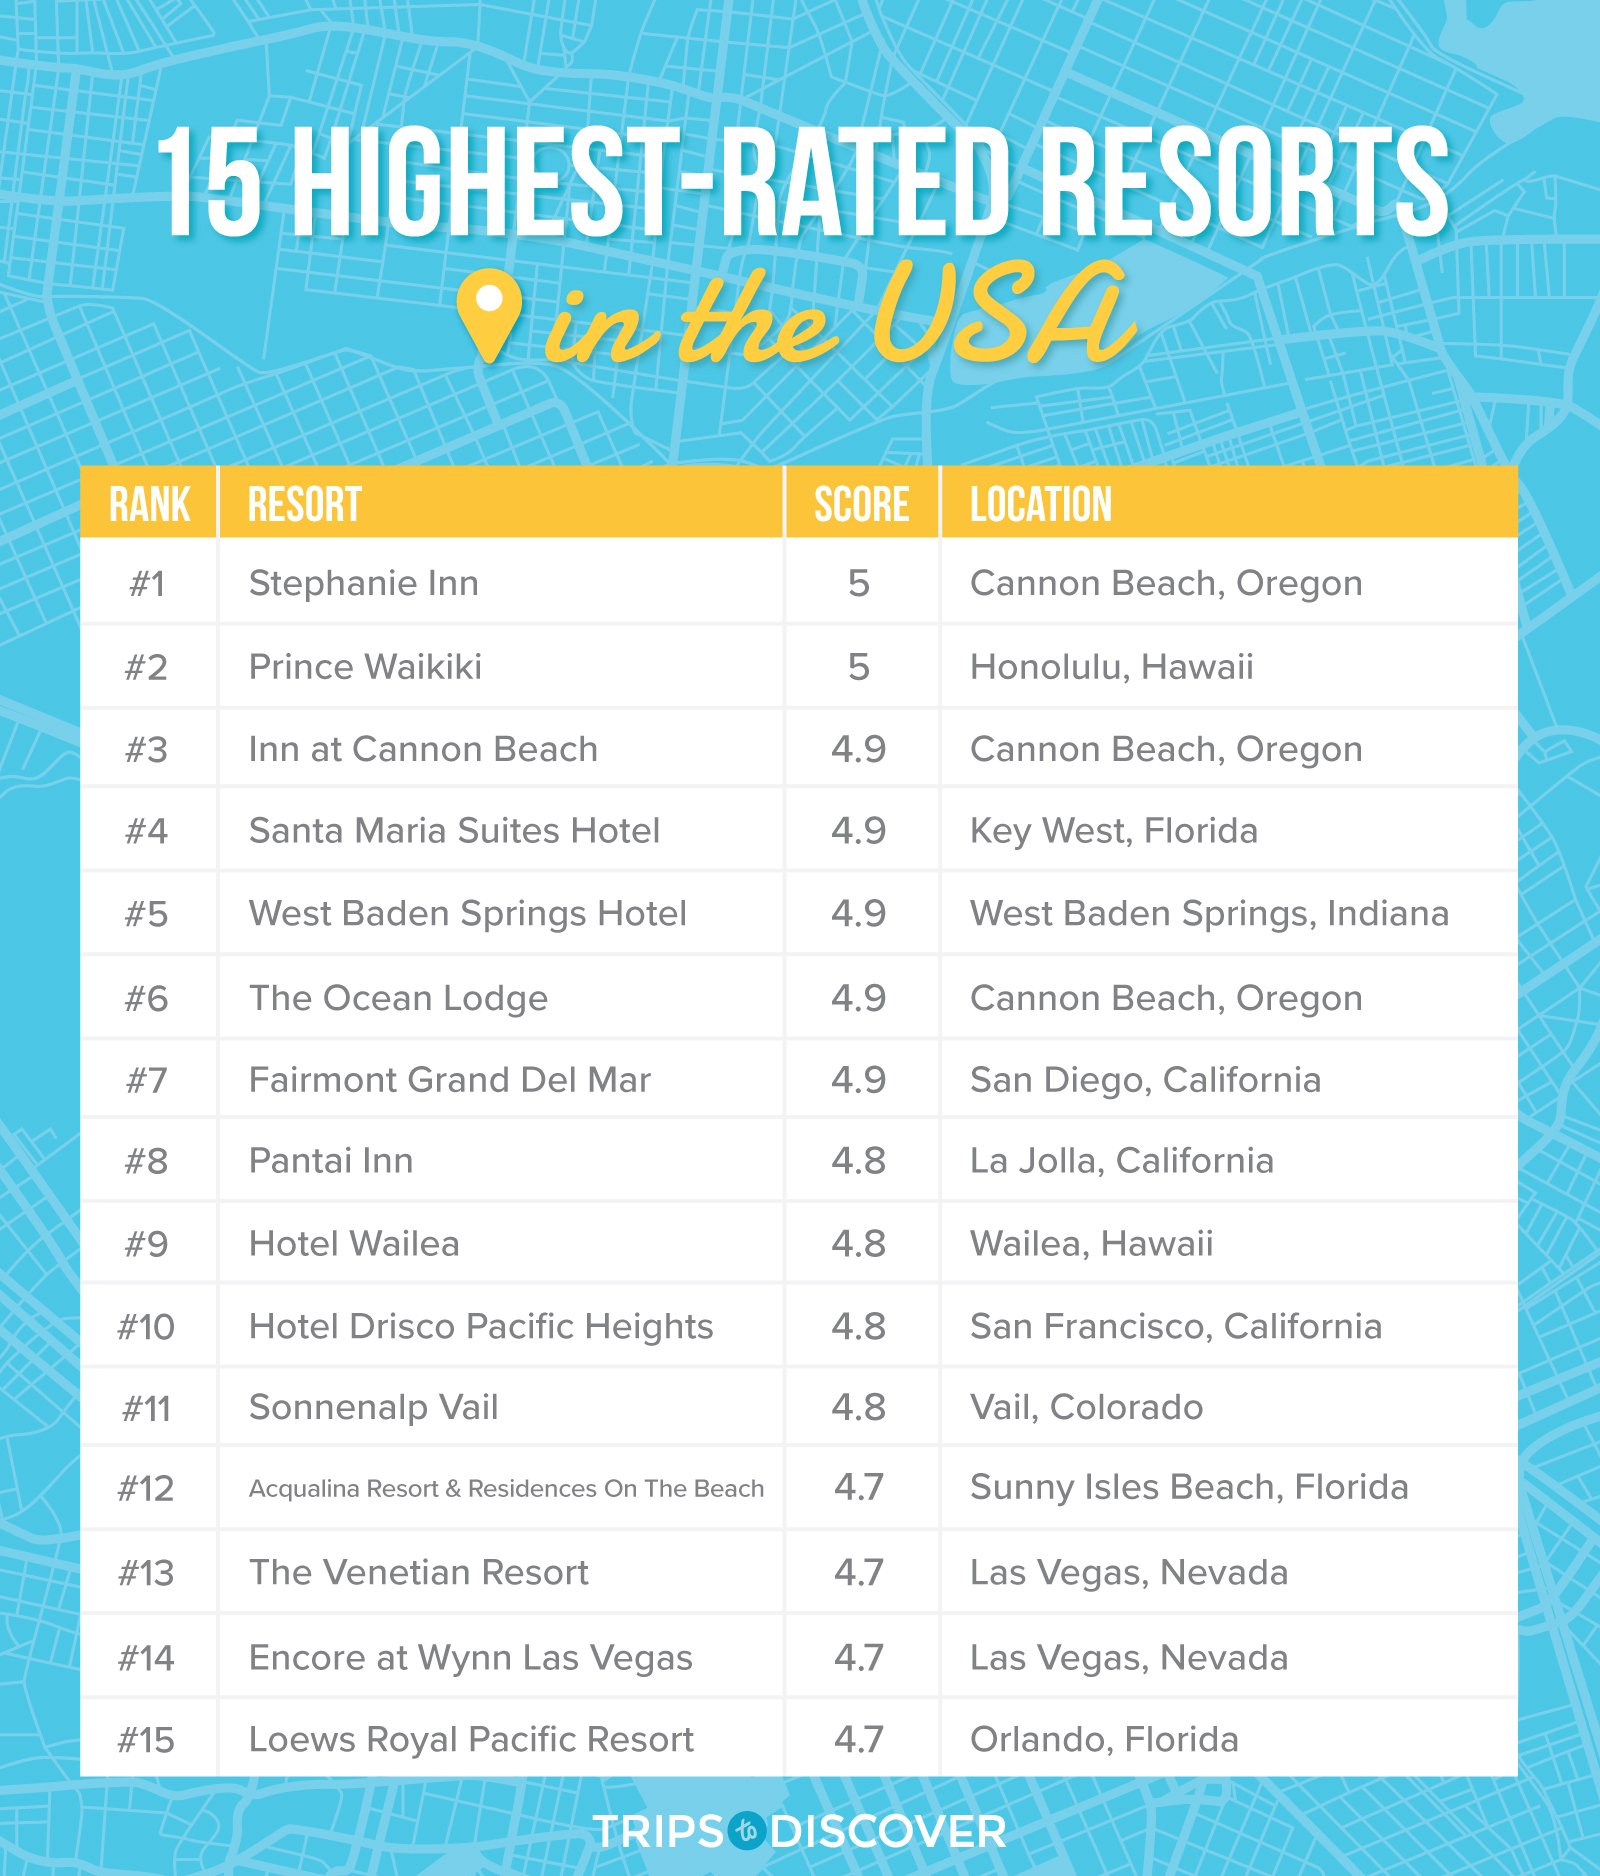 A table of the 15 highest-rated resorts in the USA, according to the study.